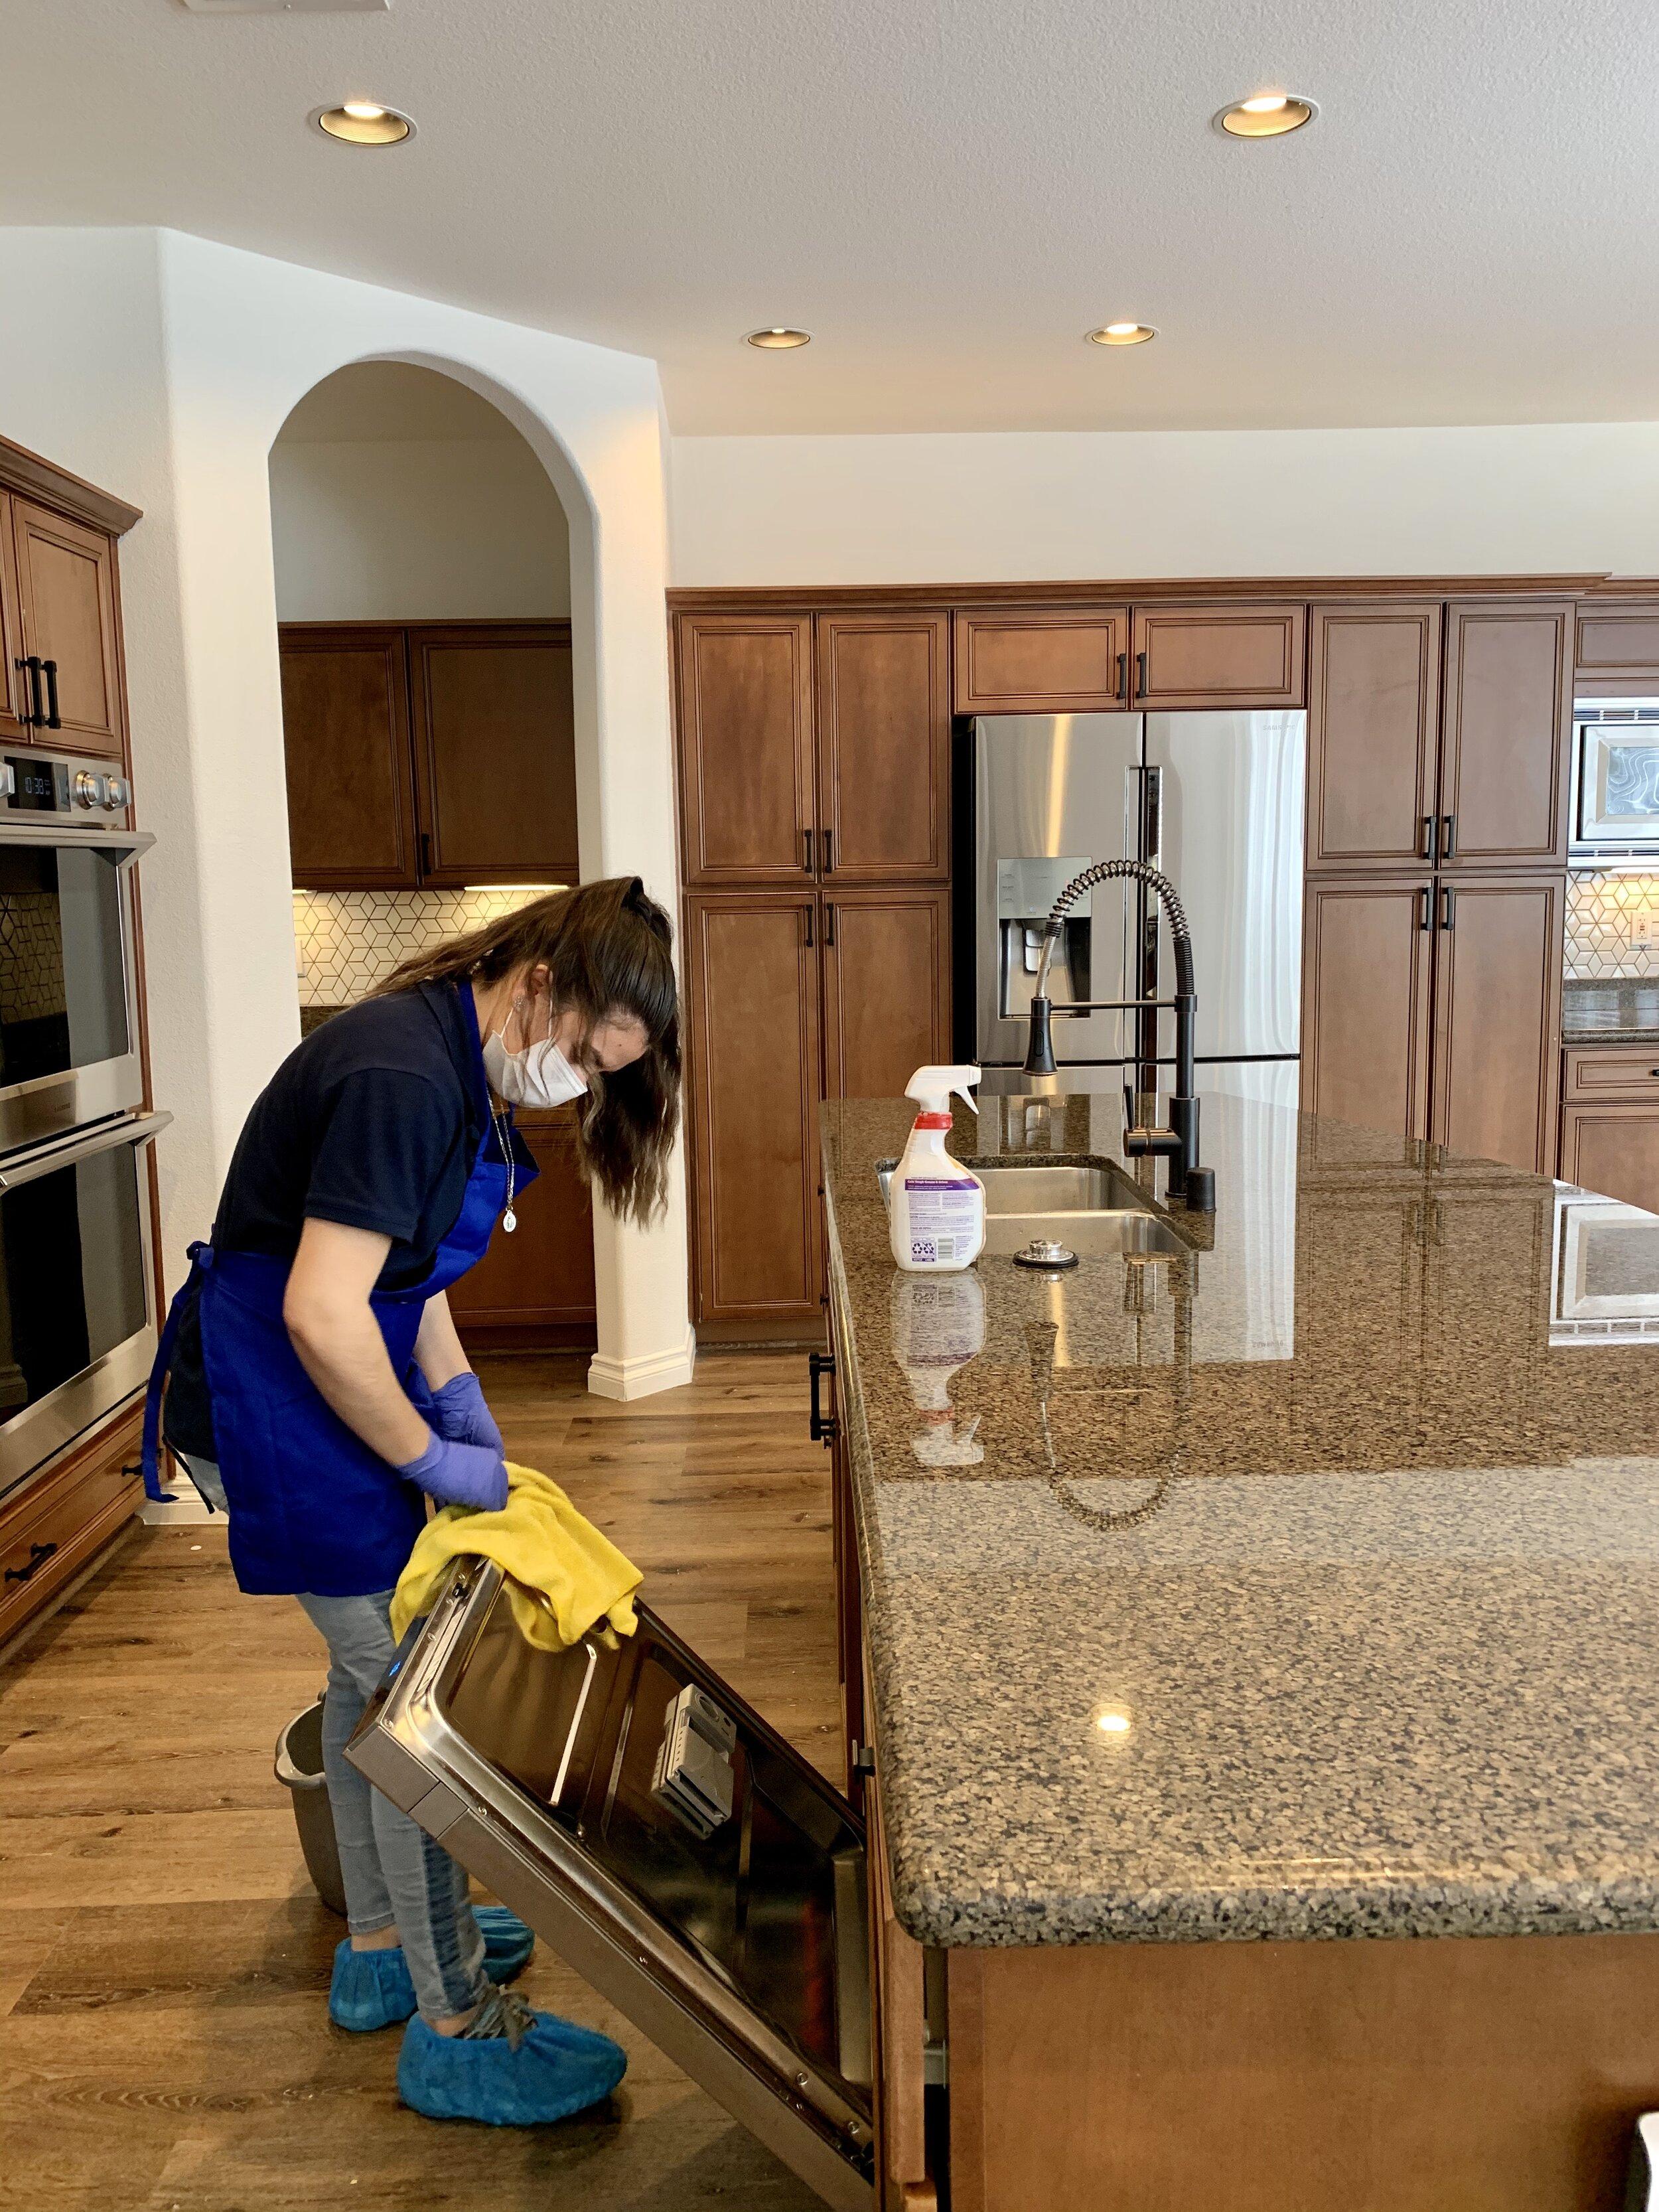 Contract Cleaning Services